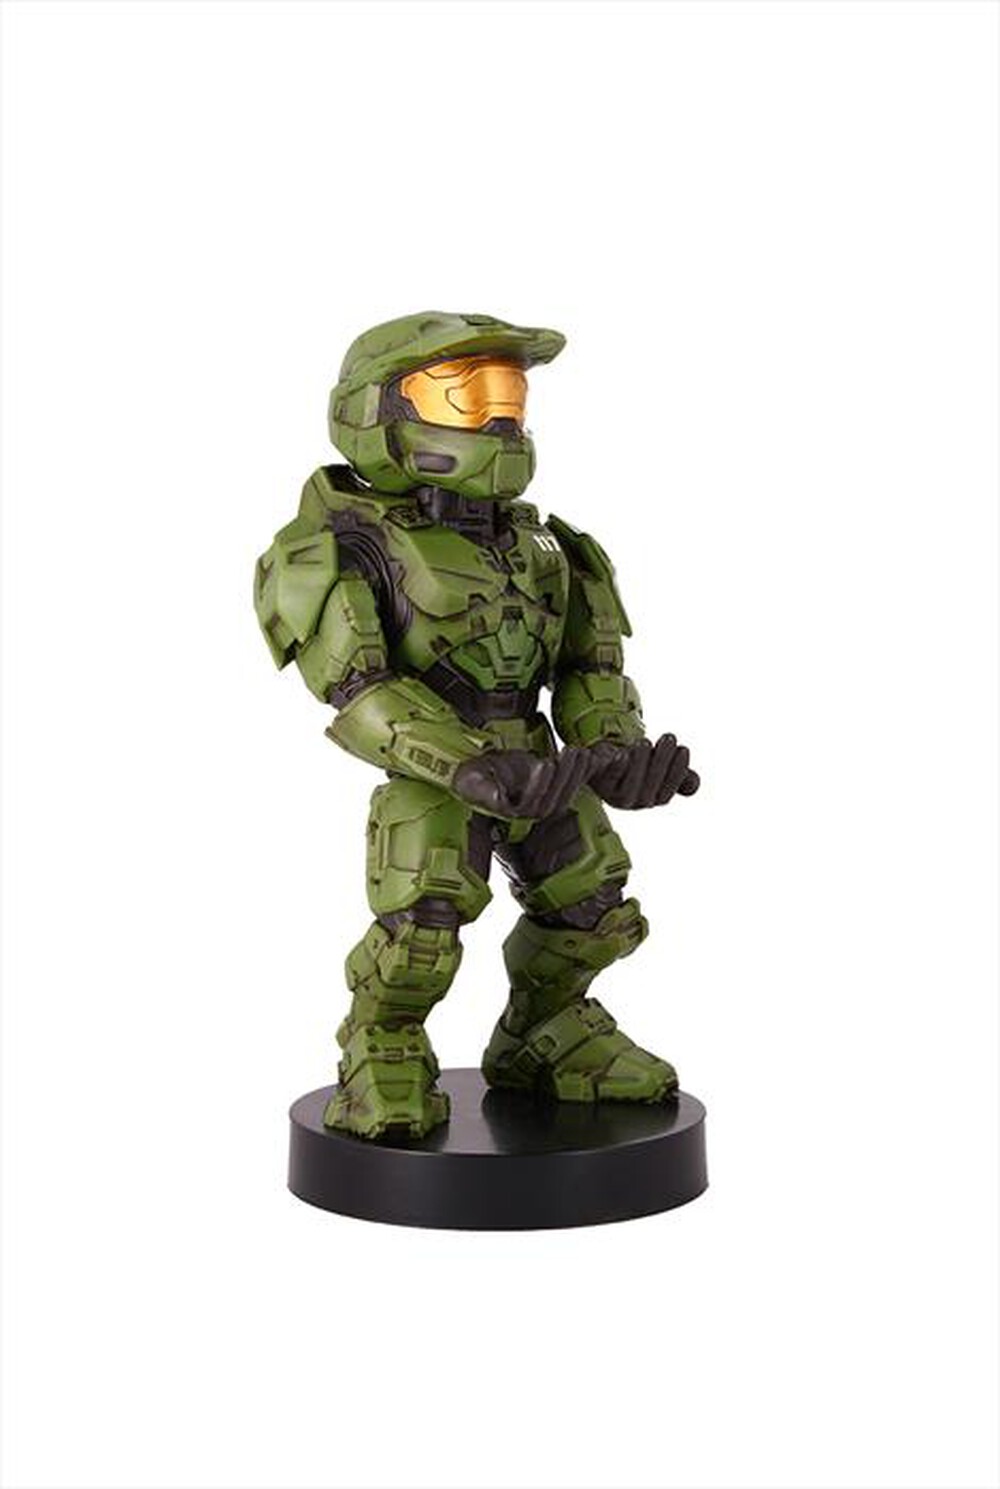 "EXQUISITE GAMING - MASTER CHIEF INFINITE CABLE GUY"